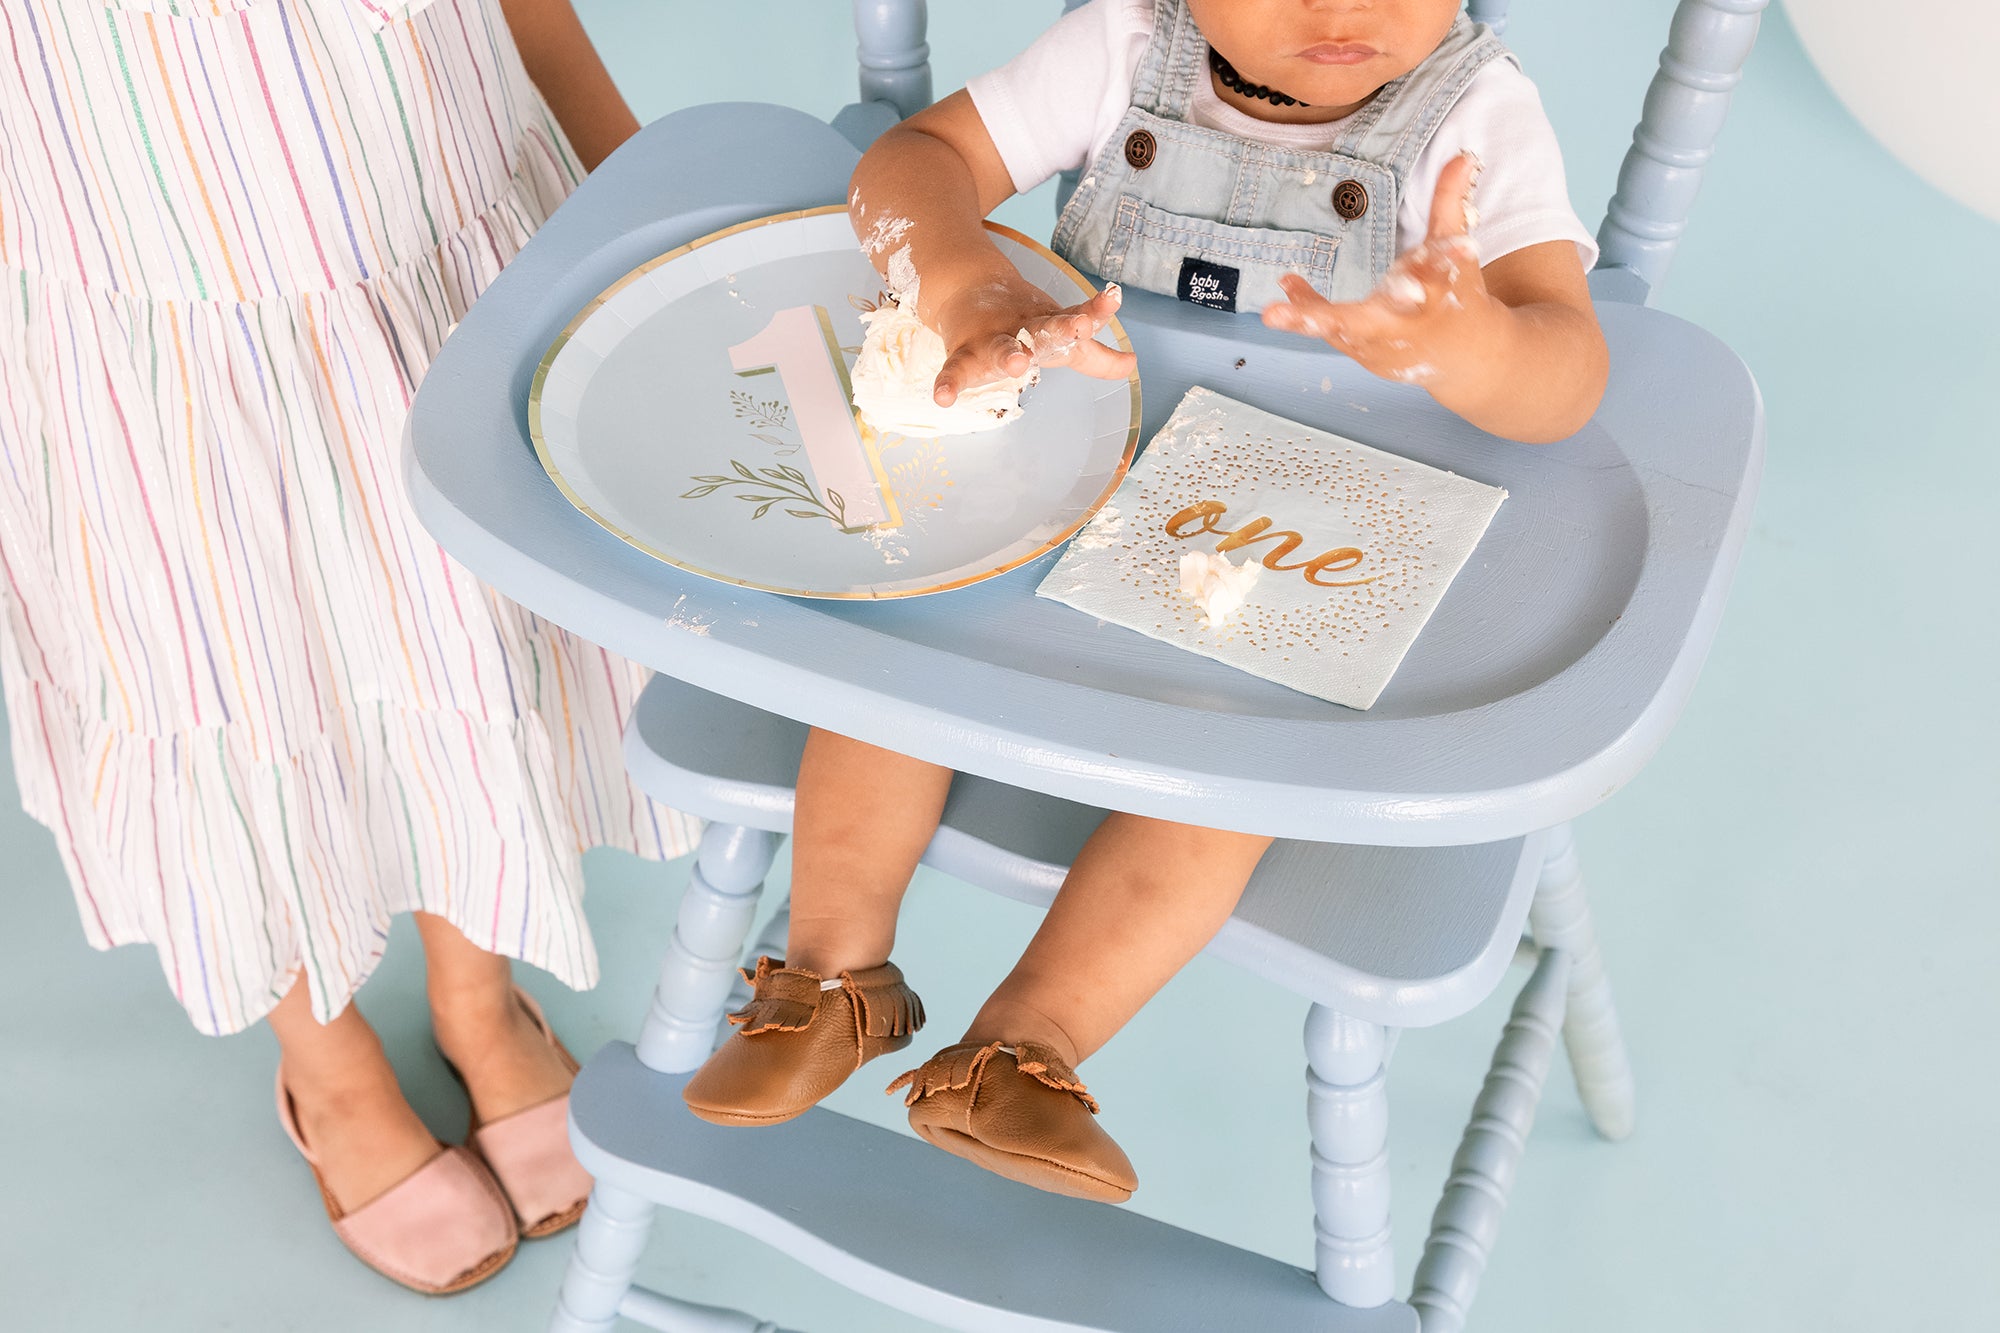 Blue & Gold 1st Birthday Lunch Plates 8ct | The Party Darling